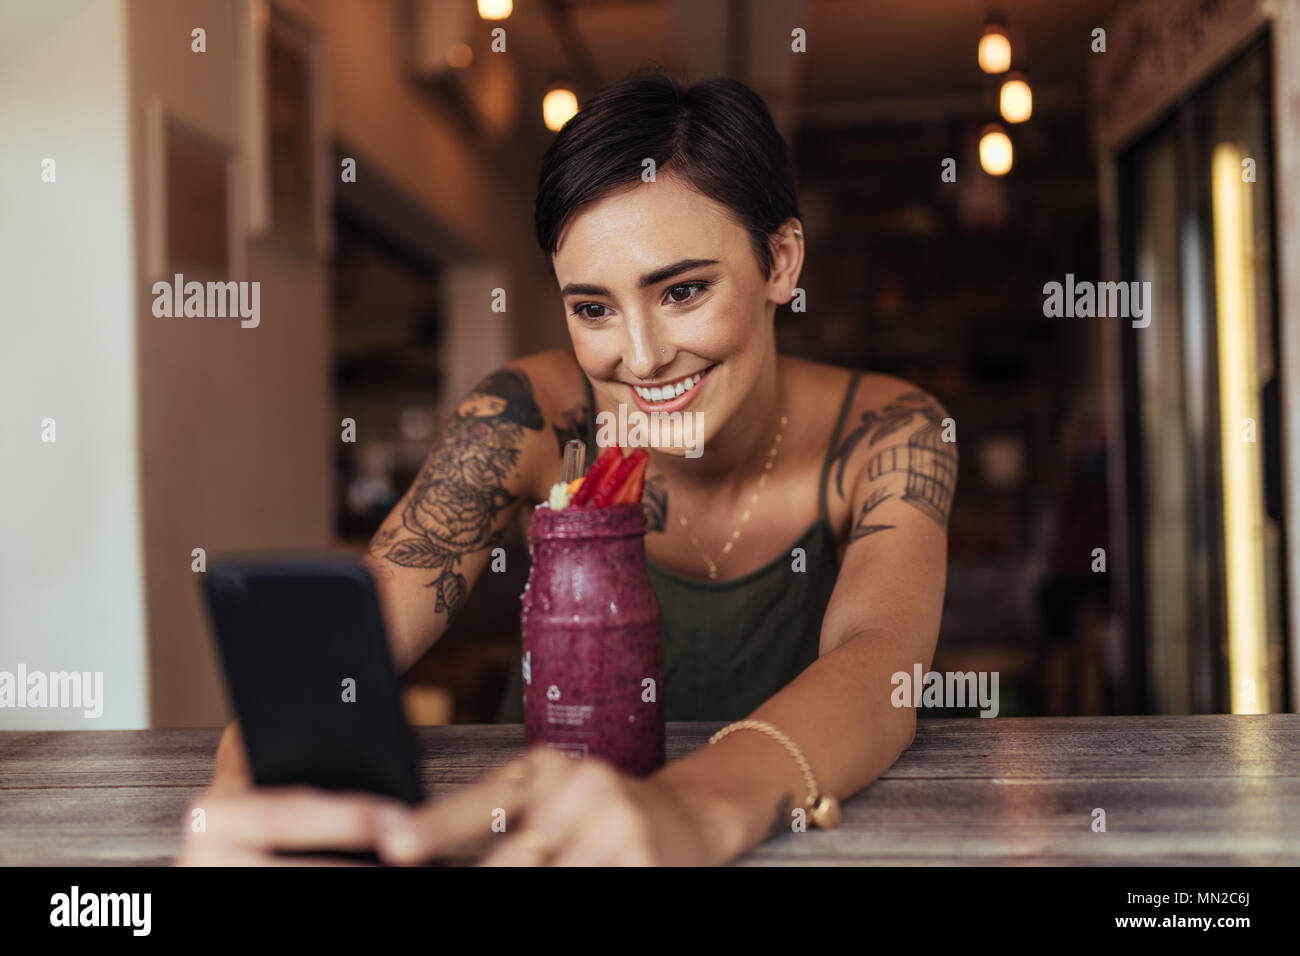 Smiling woman taking a selfie with a smoothie placed in front of her using a mobile phone for her food blog. Food blogger shooting photos for her blog Stock Photo